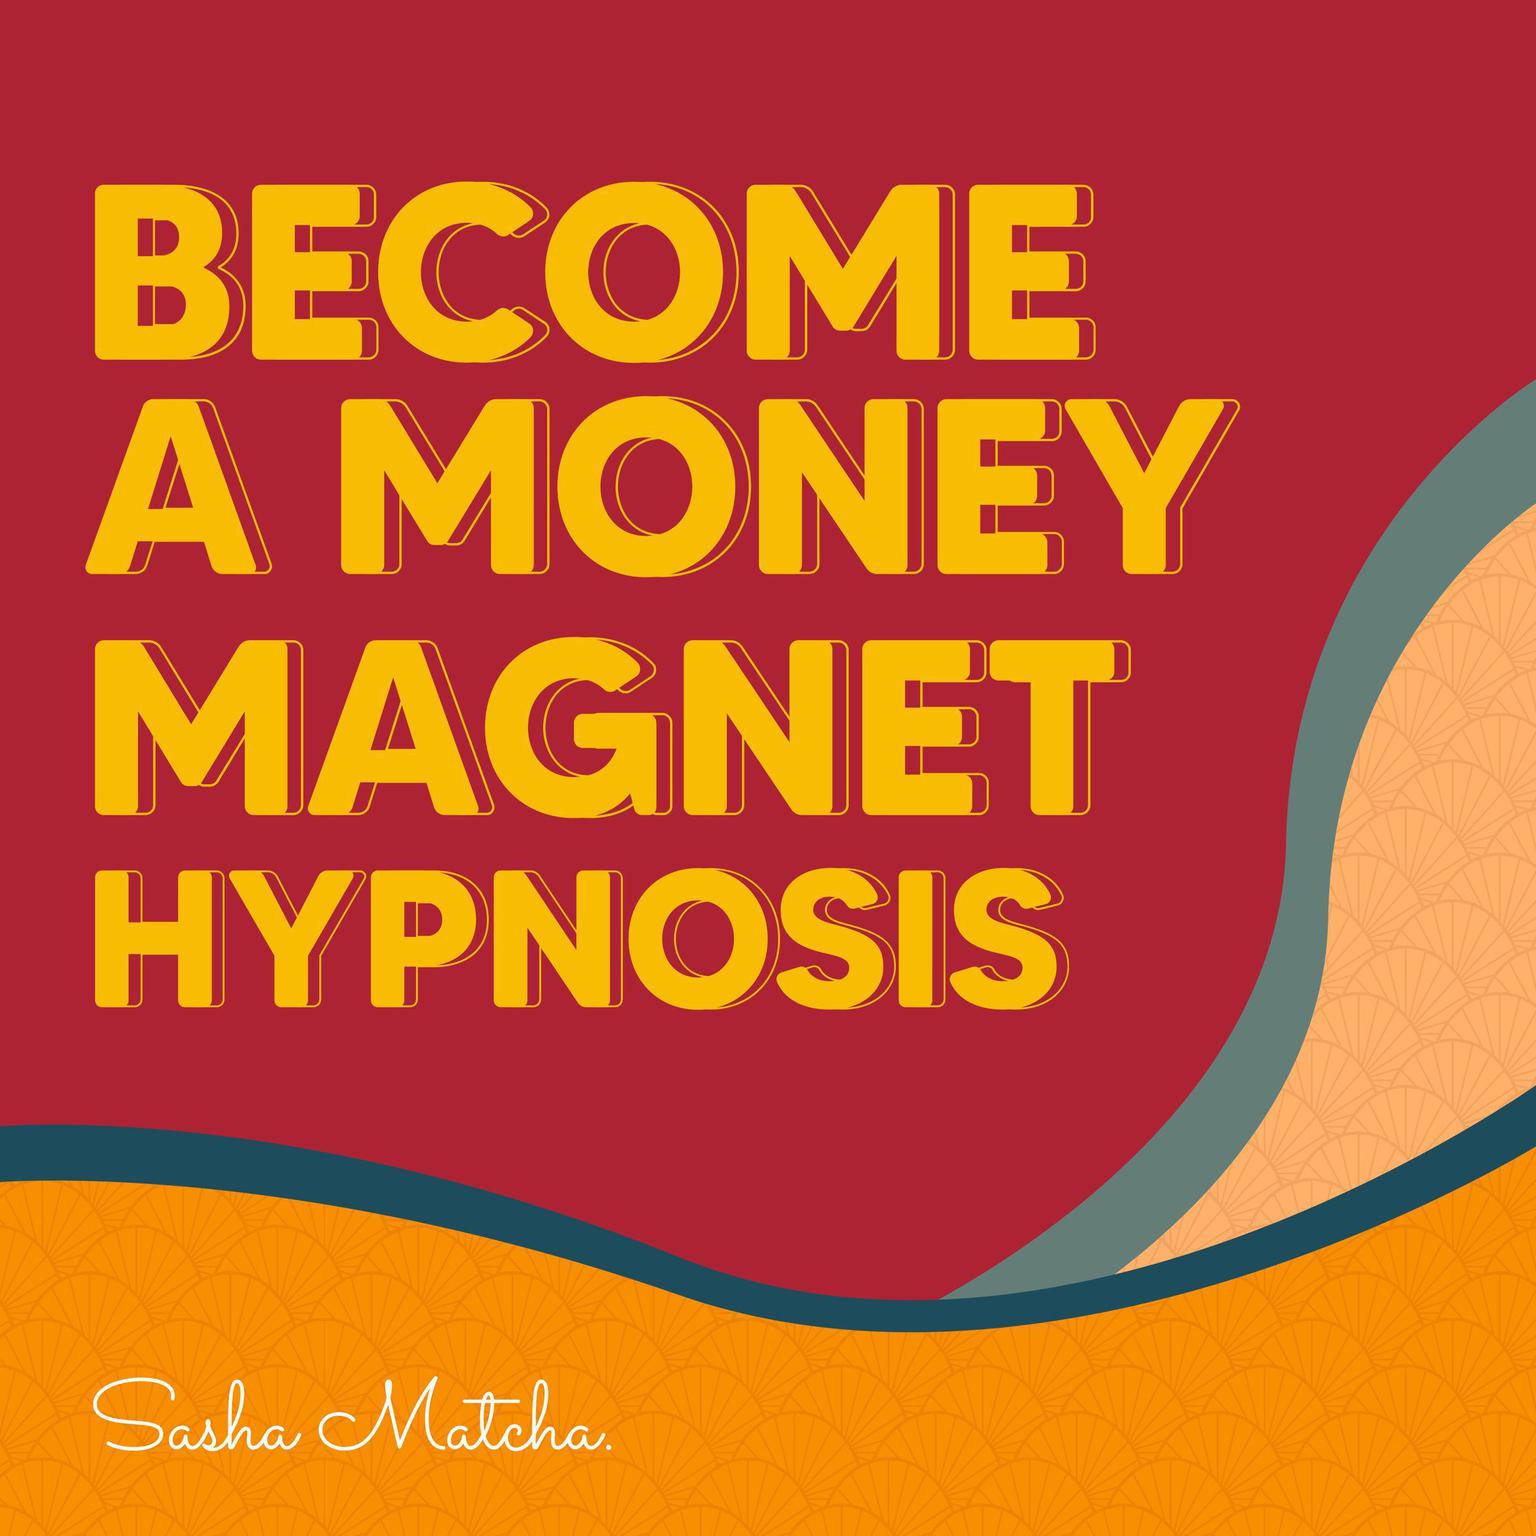 Become a Money Magnet Hypnosis: Attract Success and Wealth with Hypnosis, Meditation and Subliminal Affirmations Audiobook, by Sasha Matcha